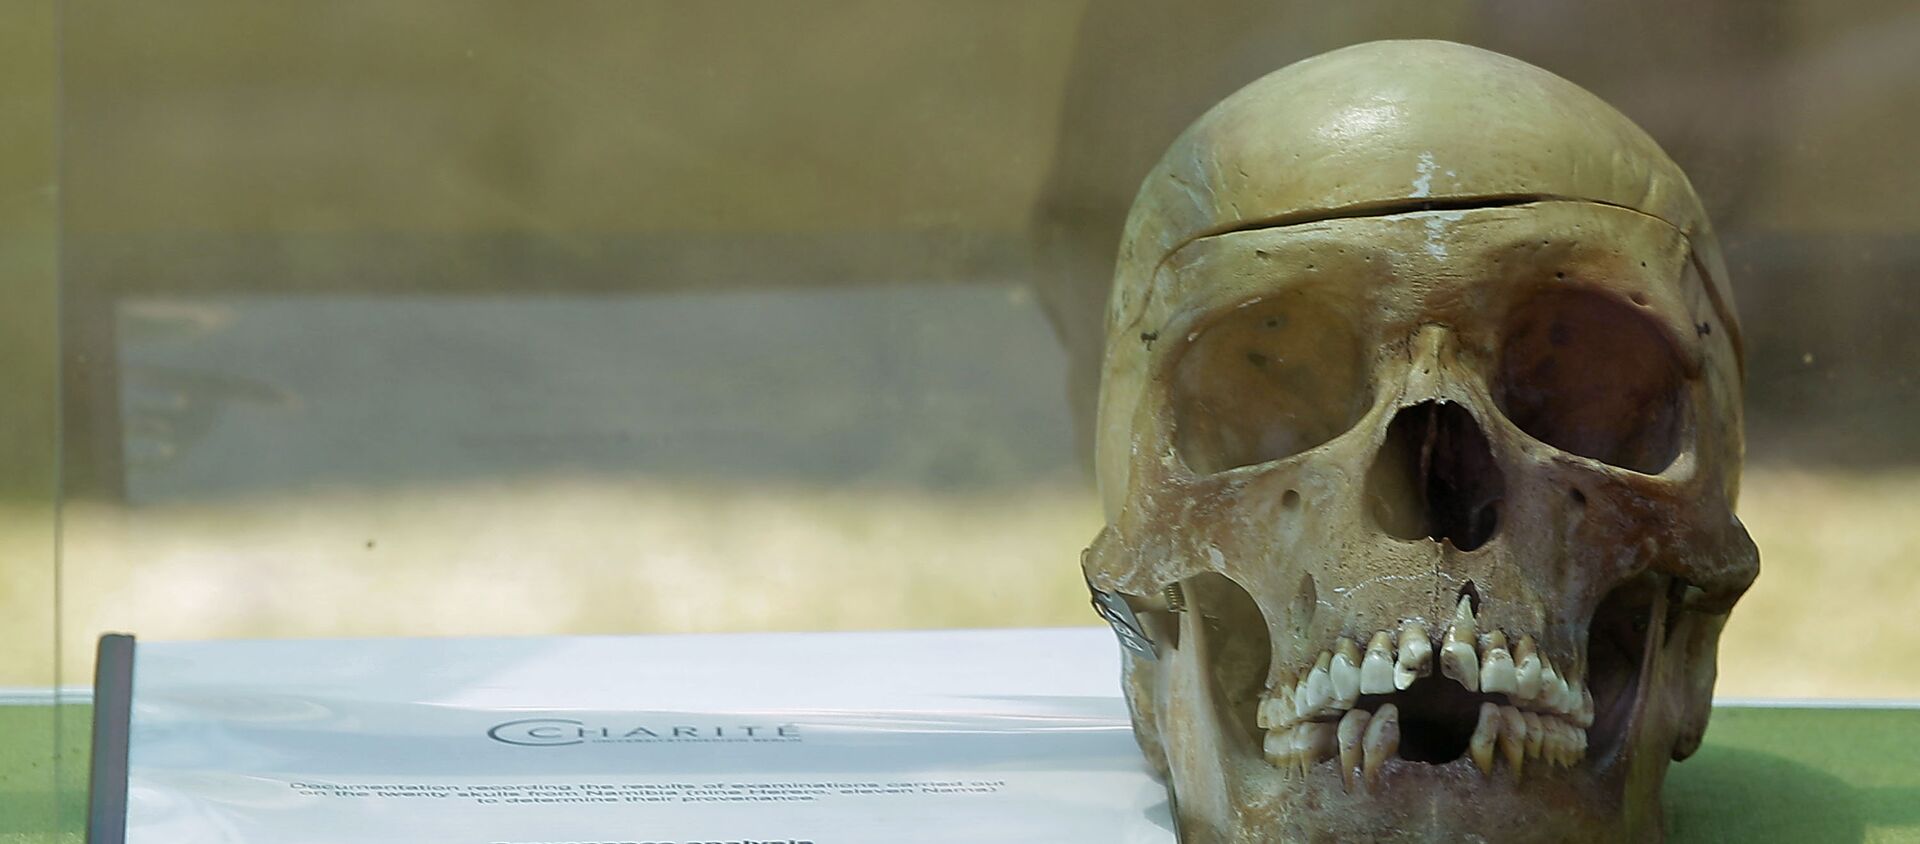 A skull from Germany on display in the city of Windhoek, Namibia, Tuesday, Oct 4, 2011. Hundreds of Namibians welcomed home the skulls of ancestors taken to Germany for racist experiments more than a century ago. The skulls are testimony to the horrors of colonialism and German cruelty against our people, Prime Minister Nahas Angula said at an airport ceremony, The Namibian nation accepts these mortal remains as a symbolic closure of a tragic chapter. - Sputnik Türkiye, 1920, 29.08.2018